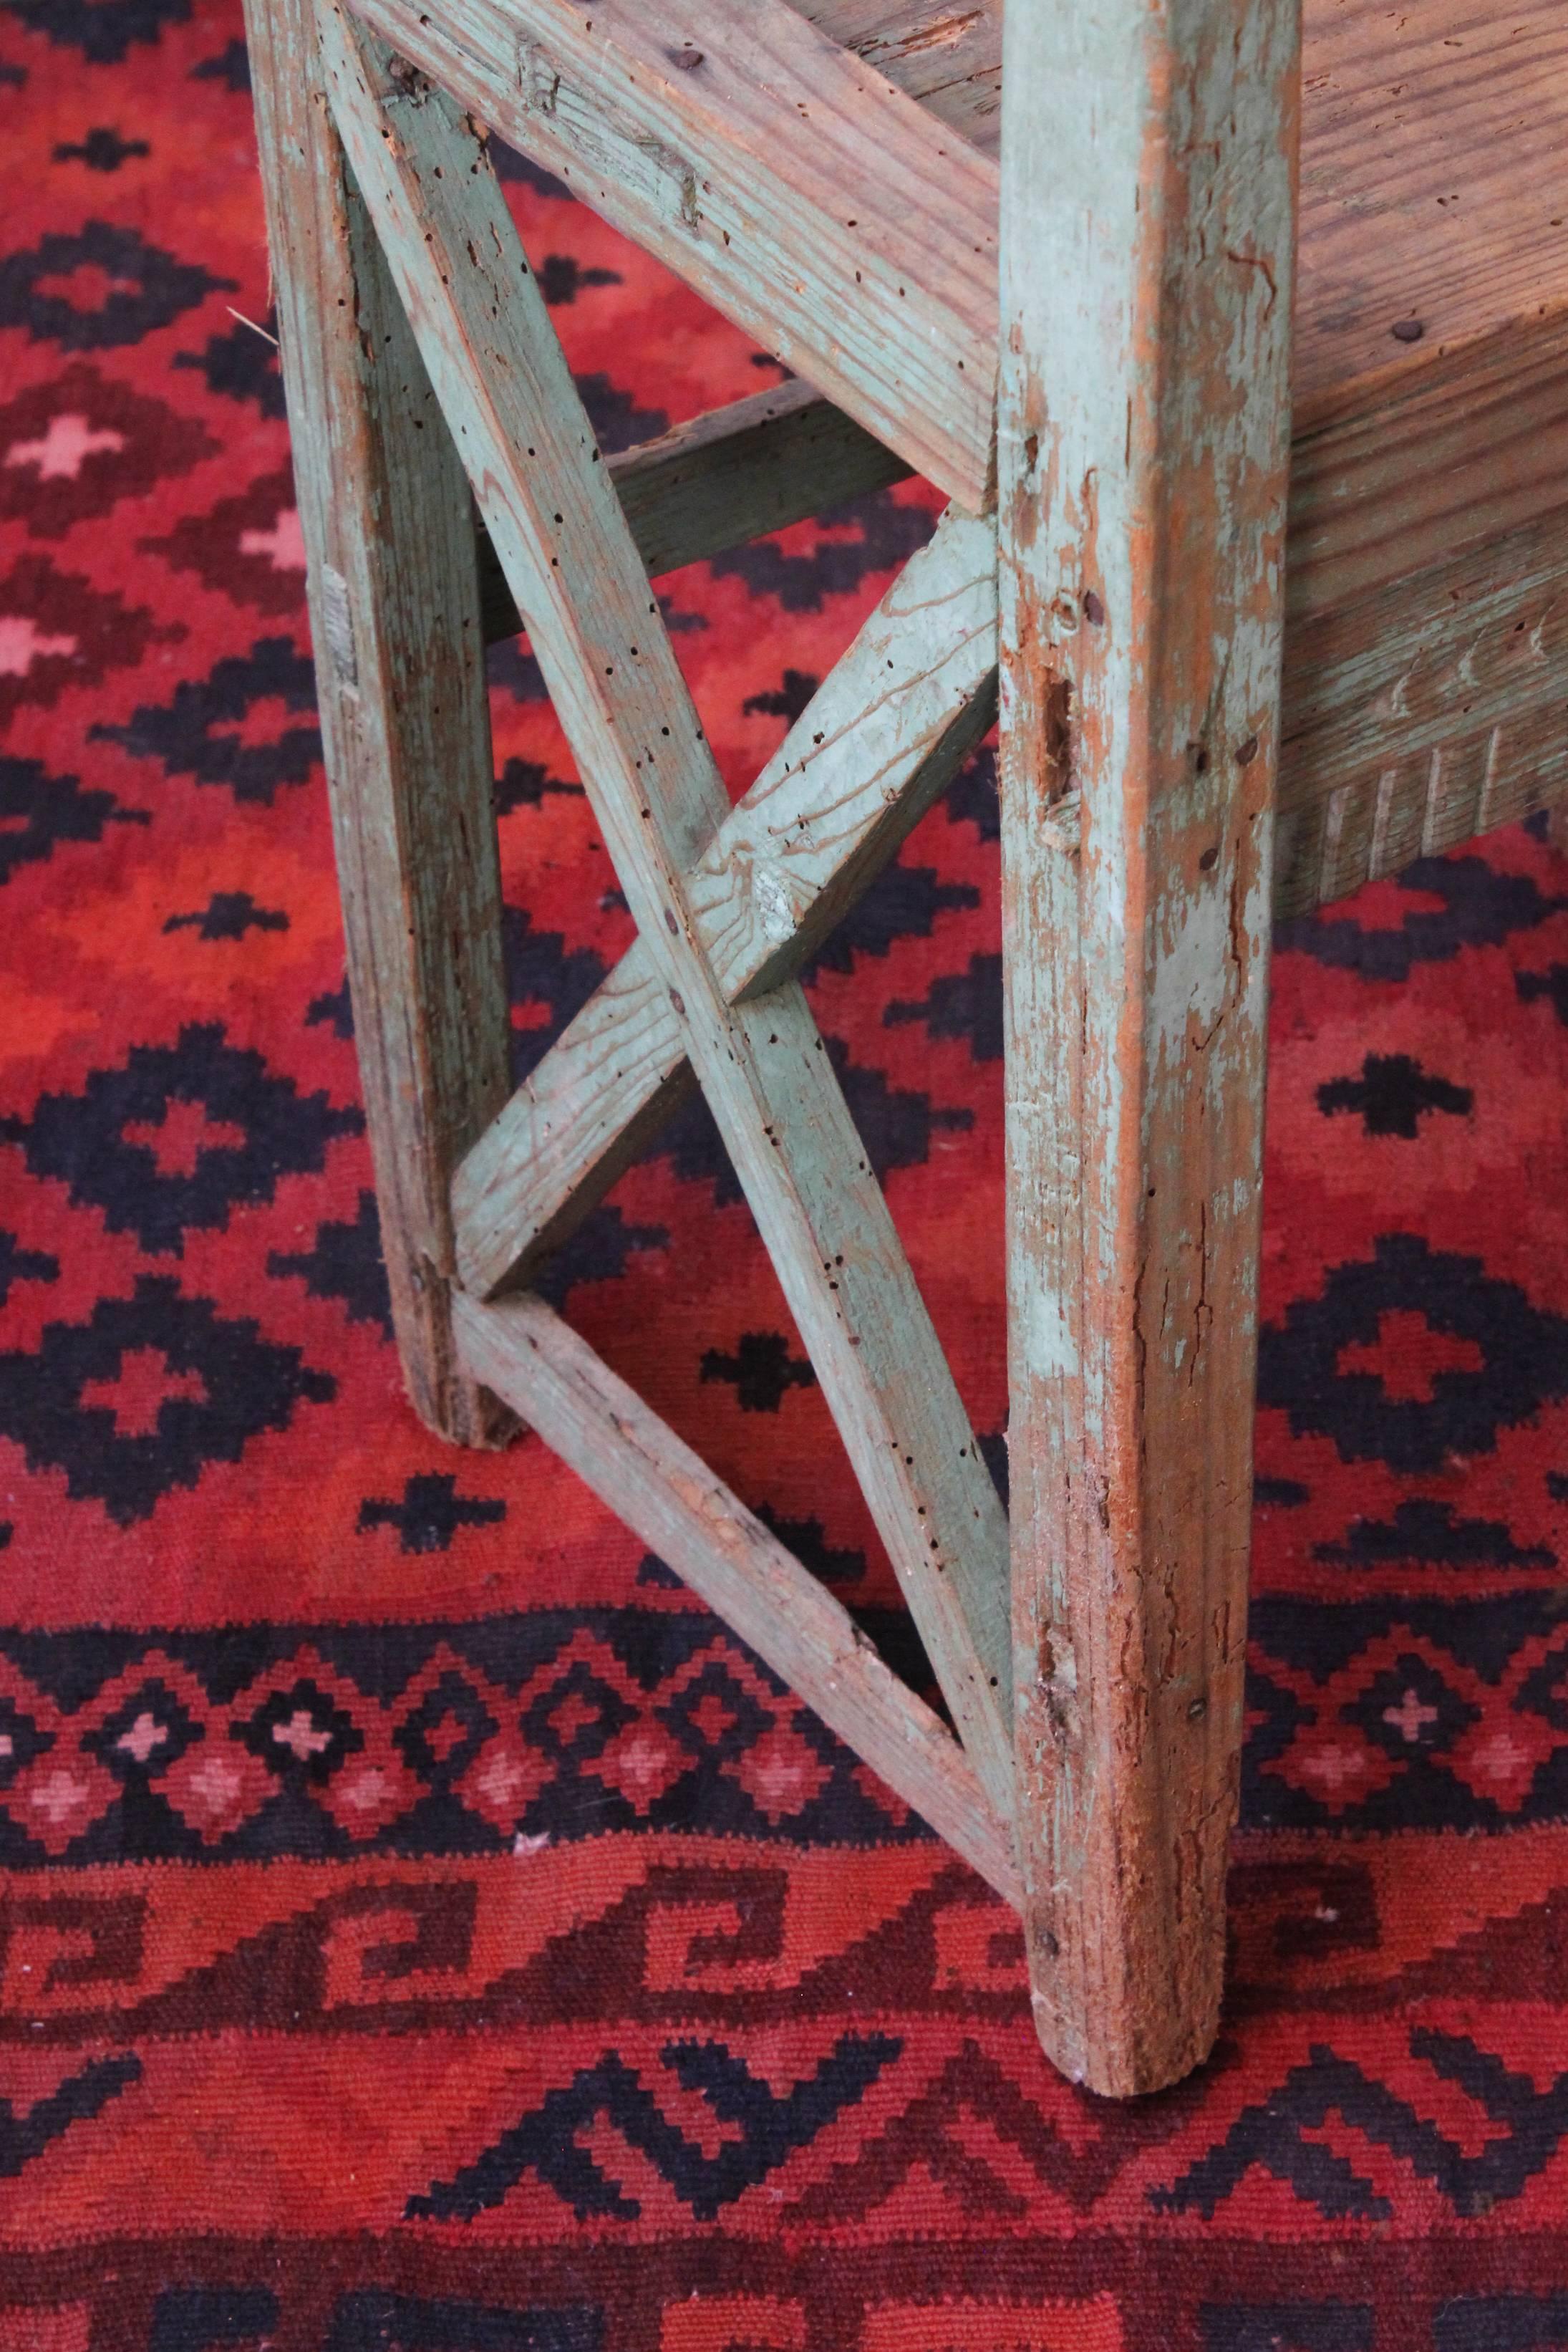 Hand-Crafted 19th Century Hand-Carved Chair Found in Wester México For Sale